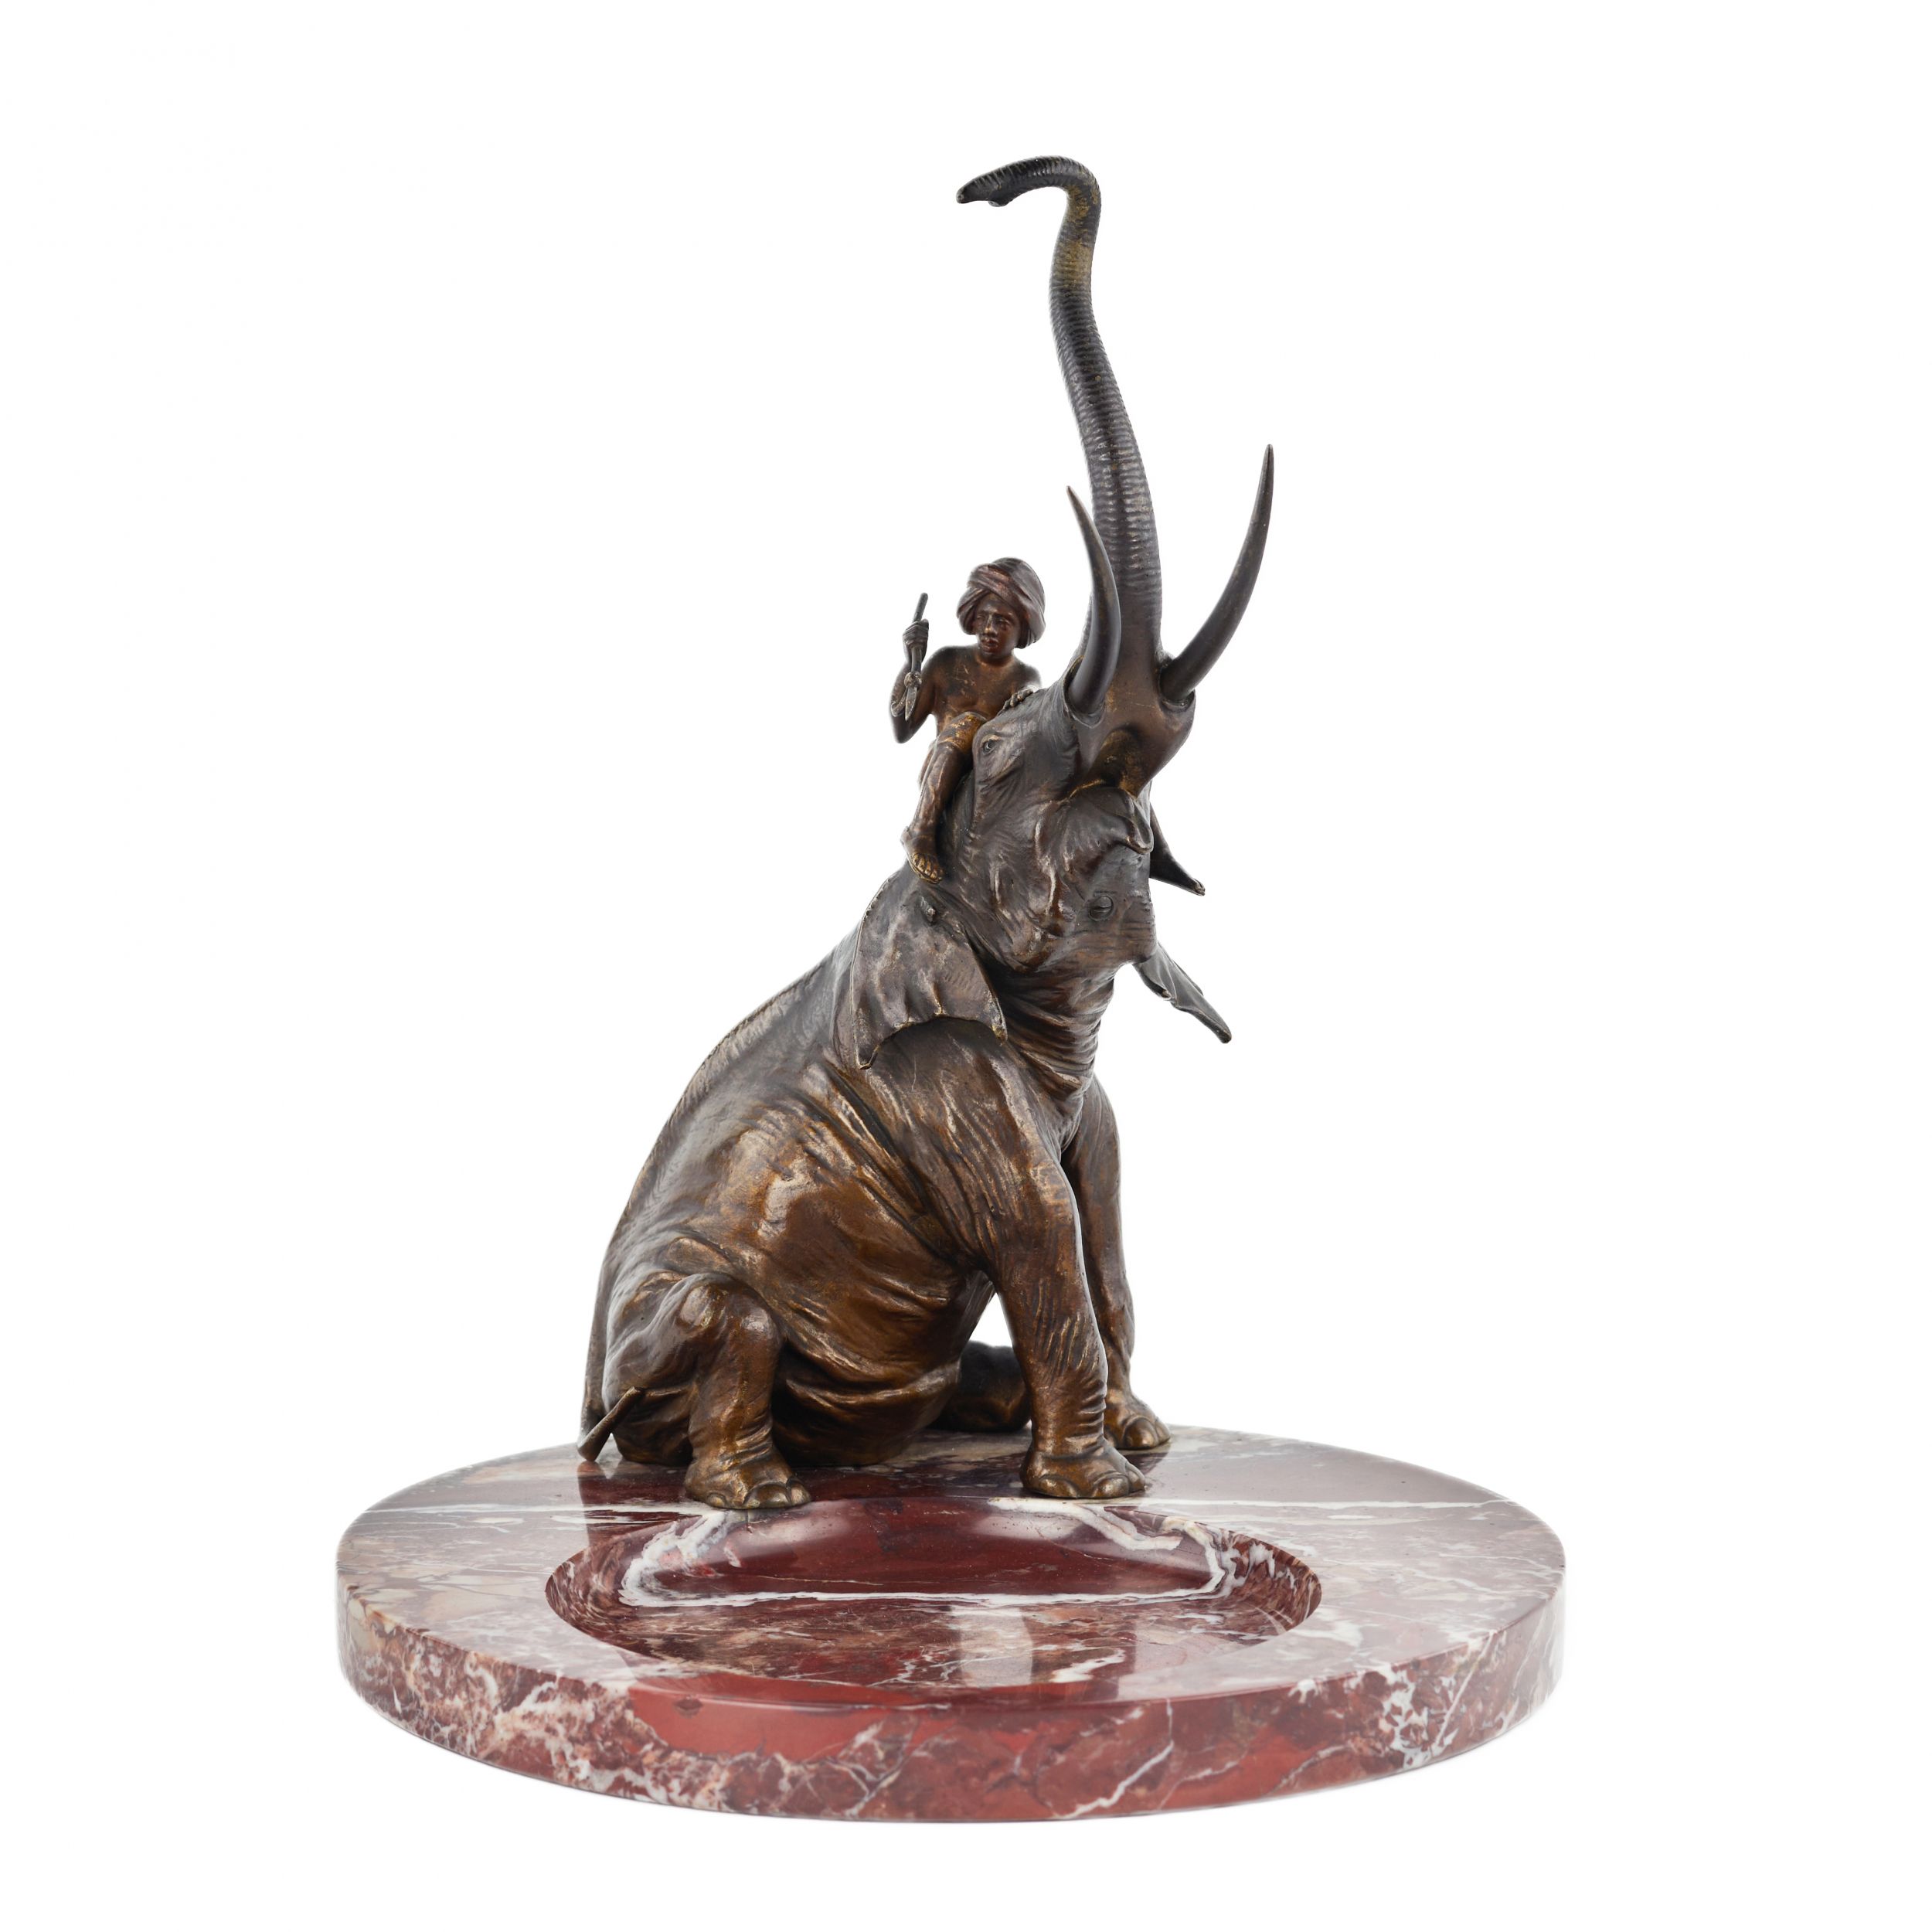 Franz Bergman. Decorative dish for small items made of marble, with a bronze figure of an elephant. - Image 2 of 5